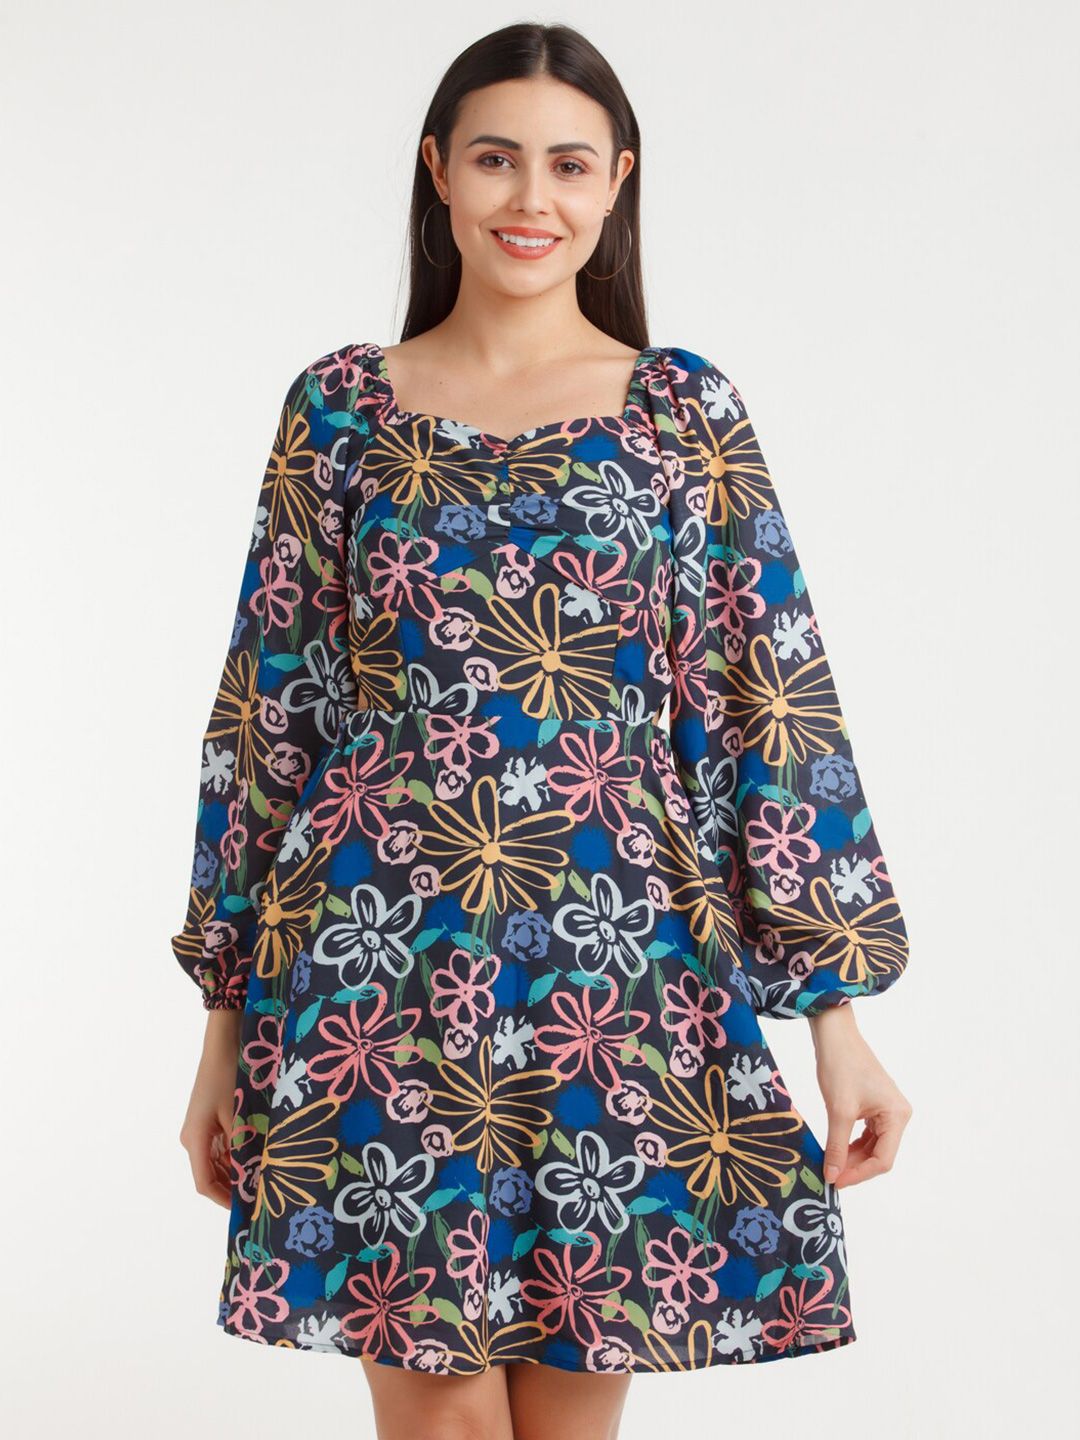 Zink London Black & Yellow Floral A-Line Dress Price in India